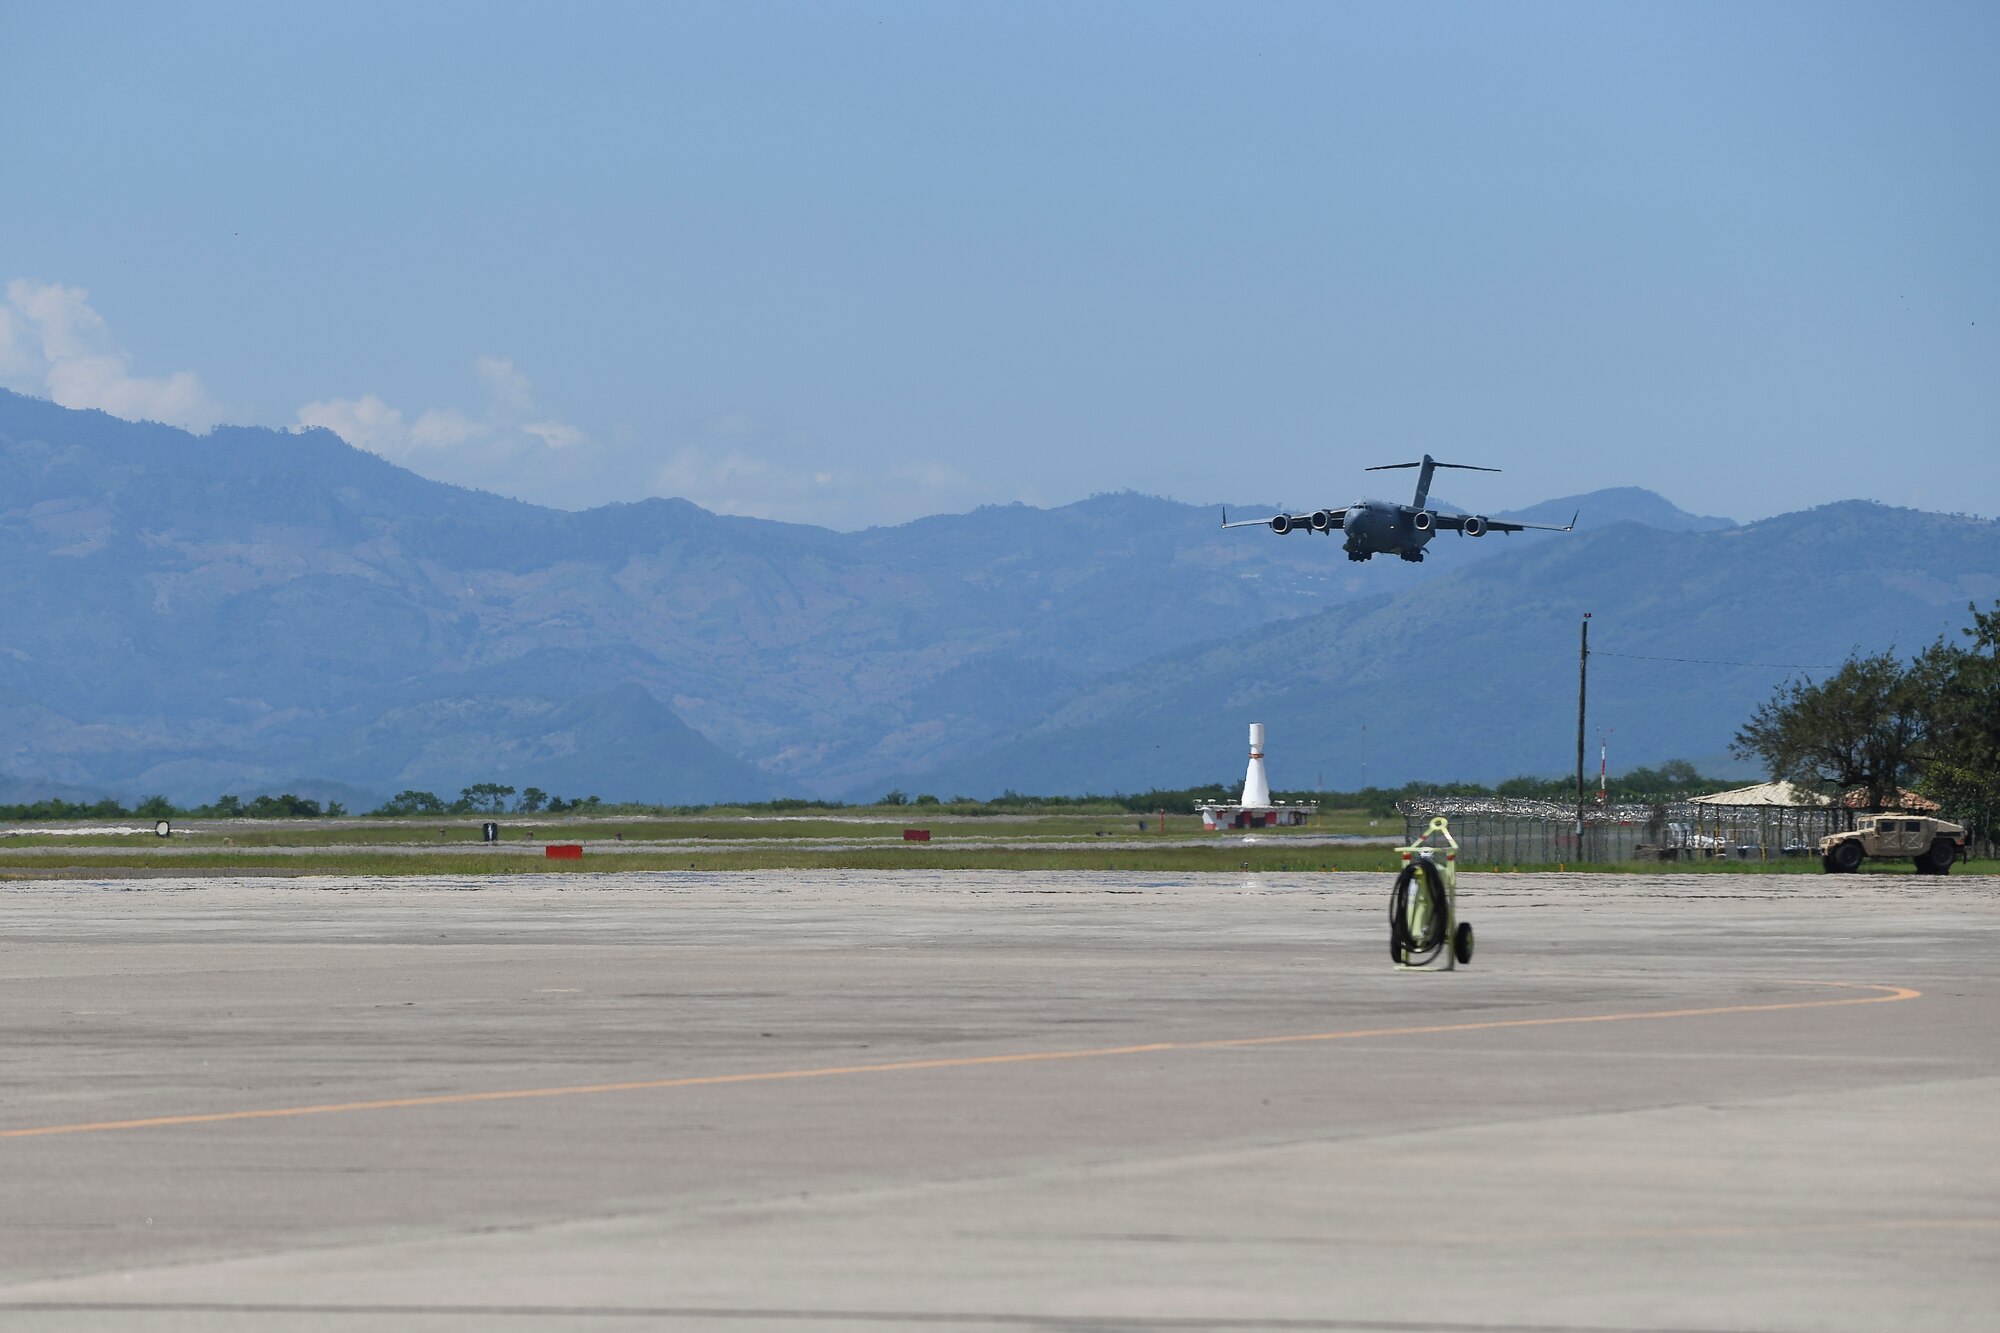 A C-17 Globemaster III from Dover Air Force Base, Del., prepares to land at Soto Cano Air Base, Honduras, Oct. 6, 2016, prior to deploying to Haiti to support the ongoing Hurricane Matthew disaster relief efforts. The aircraft and crew from Dover Air Force Base, Delaware, deployed to Soto Cano within hours of being requested by U.S. Southern Command to transport additional personnel and equipment necessary to sustain flight and maintenance operations for to support Joint Task Force Matthew hurricane relief operations where approximately 200 Soldiers, Airmen and Marines from Special Purpose Marine Air-Ground Task Force-Southern Command and Joint Task Force-Bravo deployed this week with two CH-53E Super Stallion, three CH-47 Chinook, and two UH-60L and two HH-60L Black Hawk helicopters to provide heavy and medium lift to support the U.S. Agency for International Development-led mission.